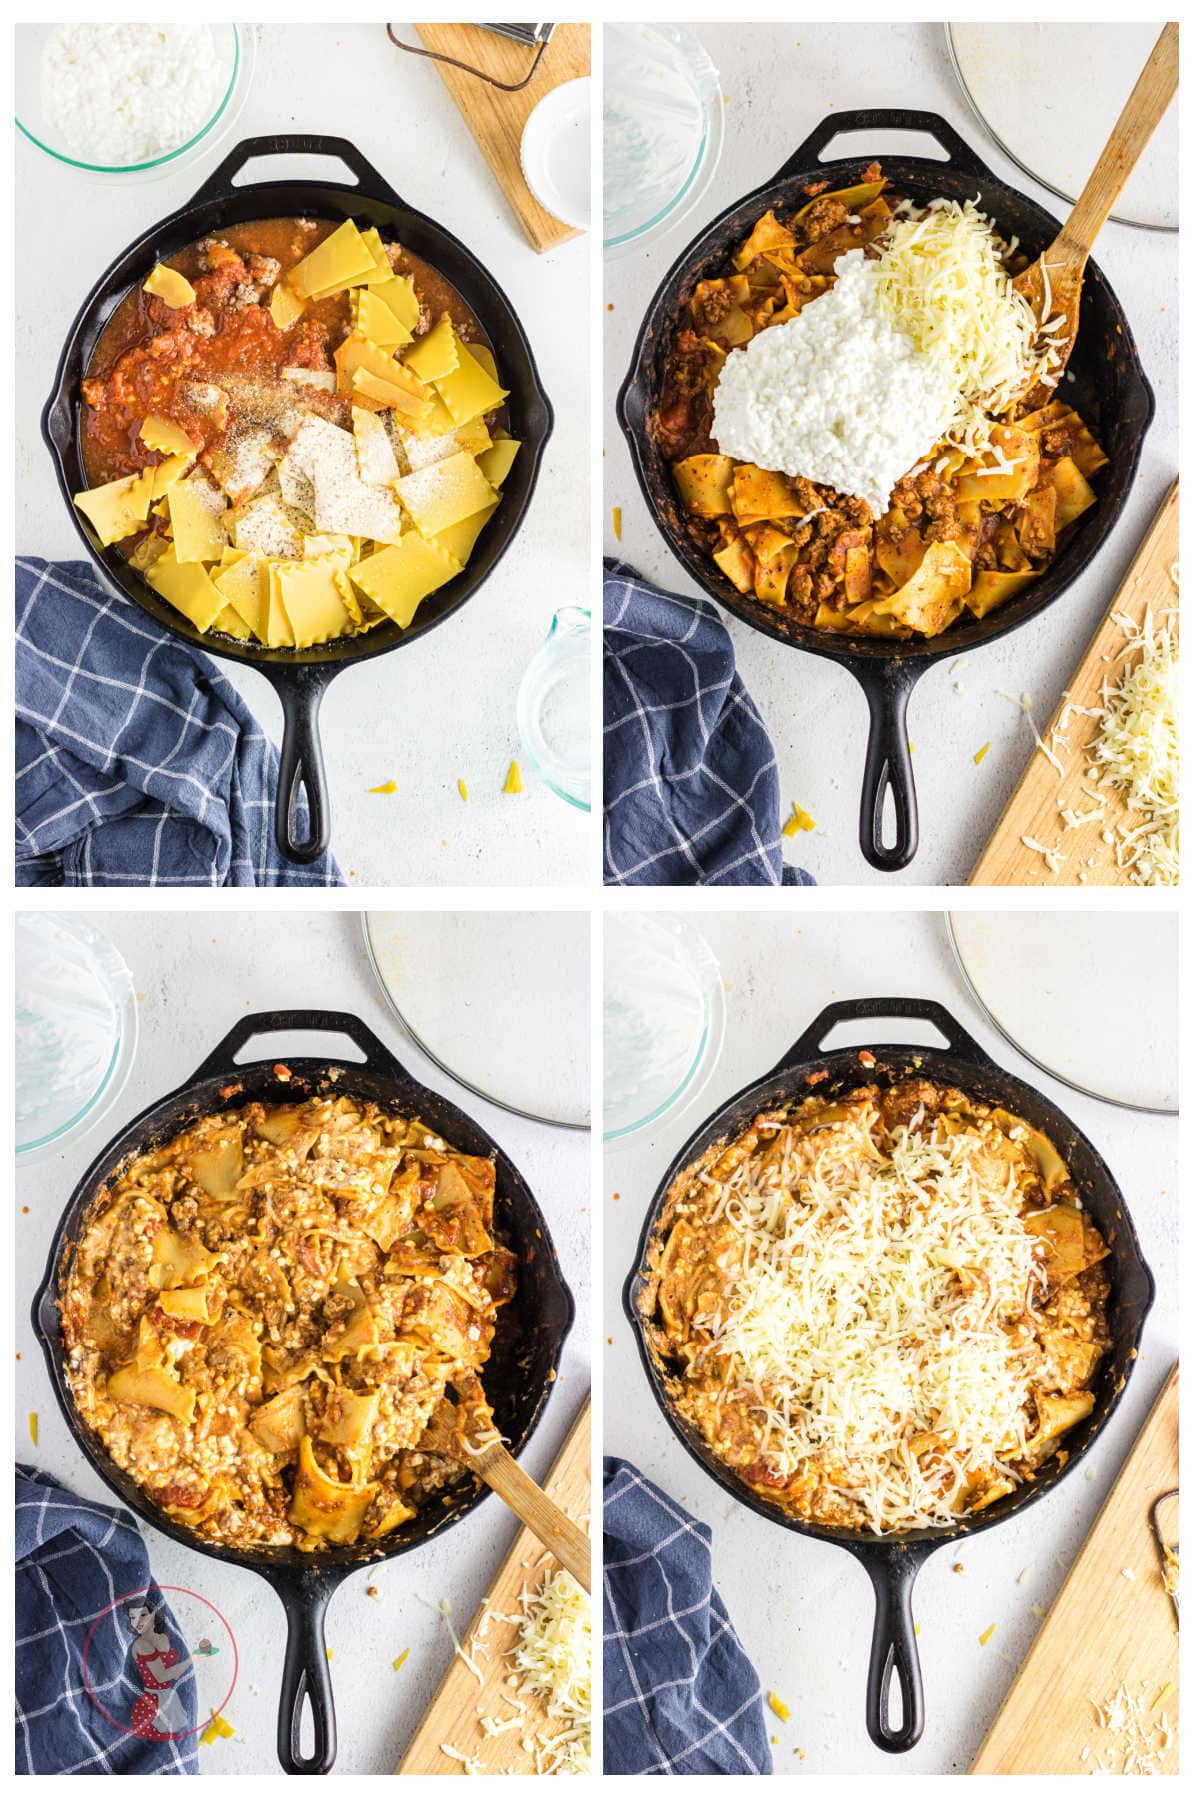 Step by step images showing how to make skillet lasagna.